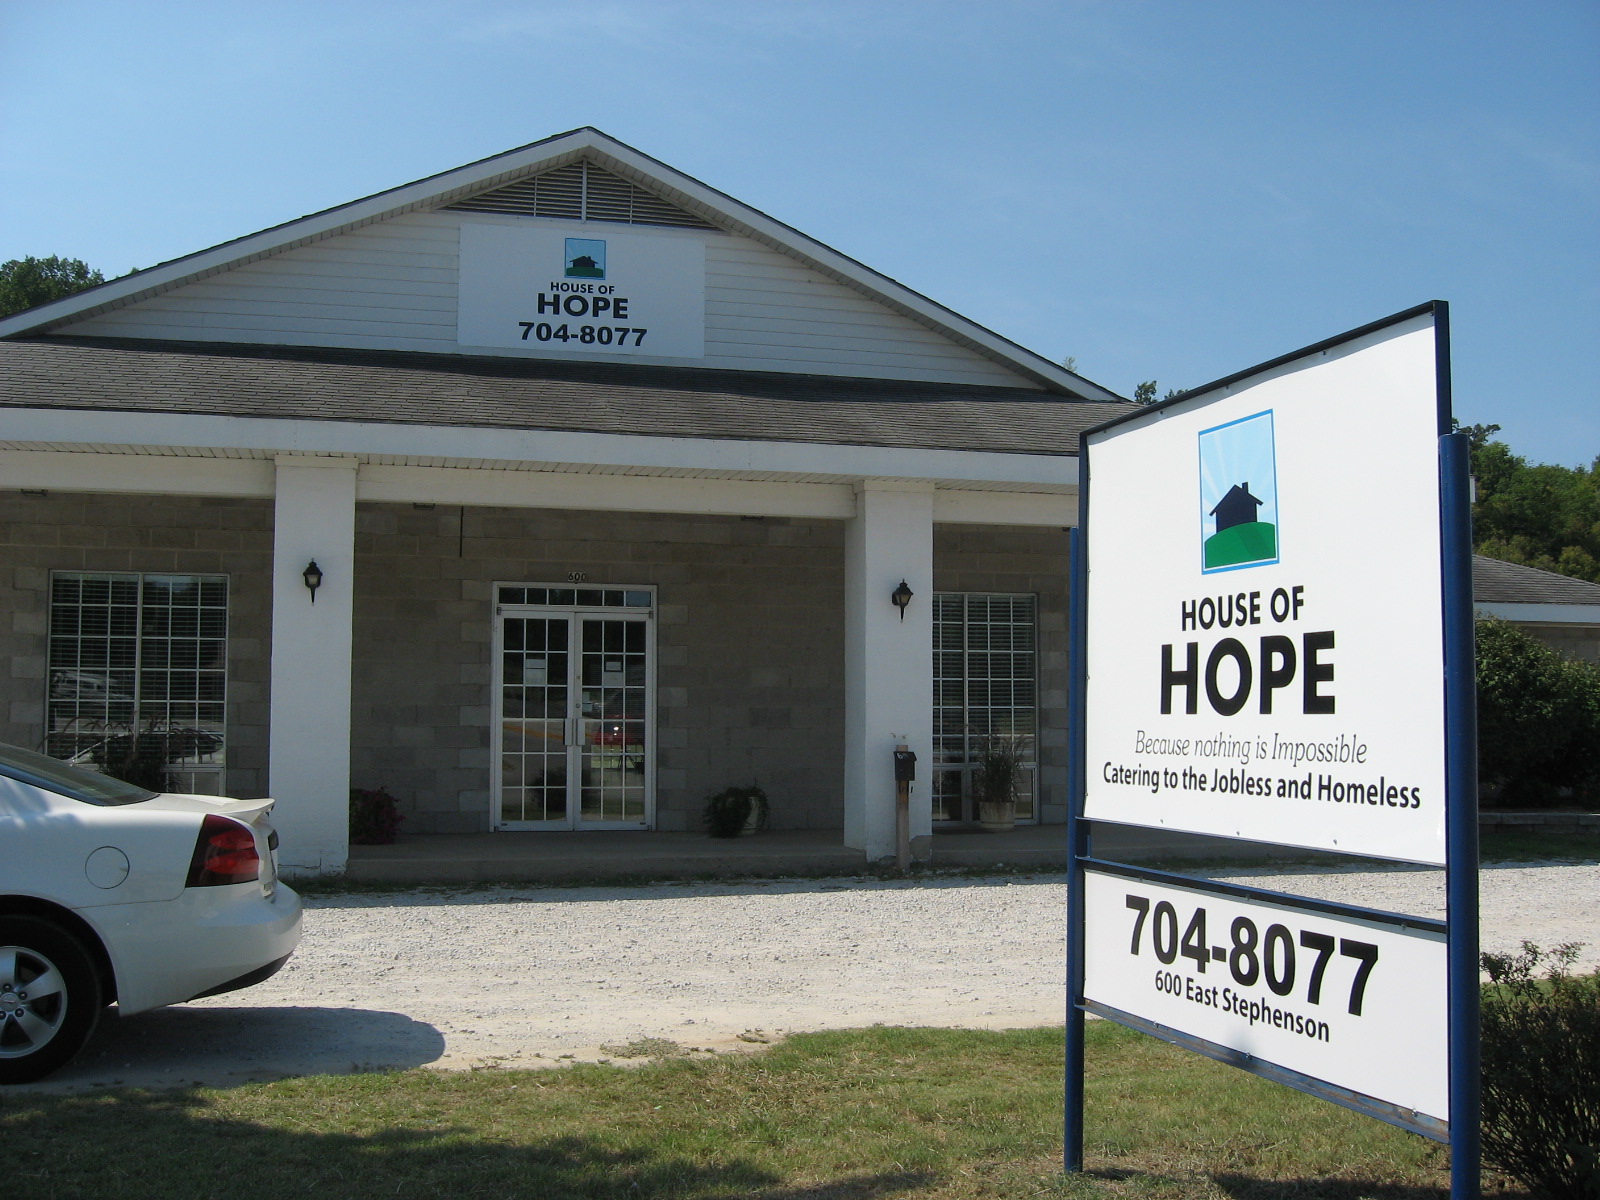 House of Hope